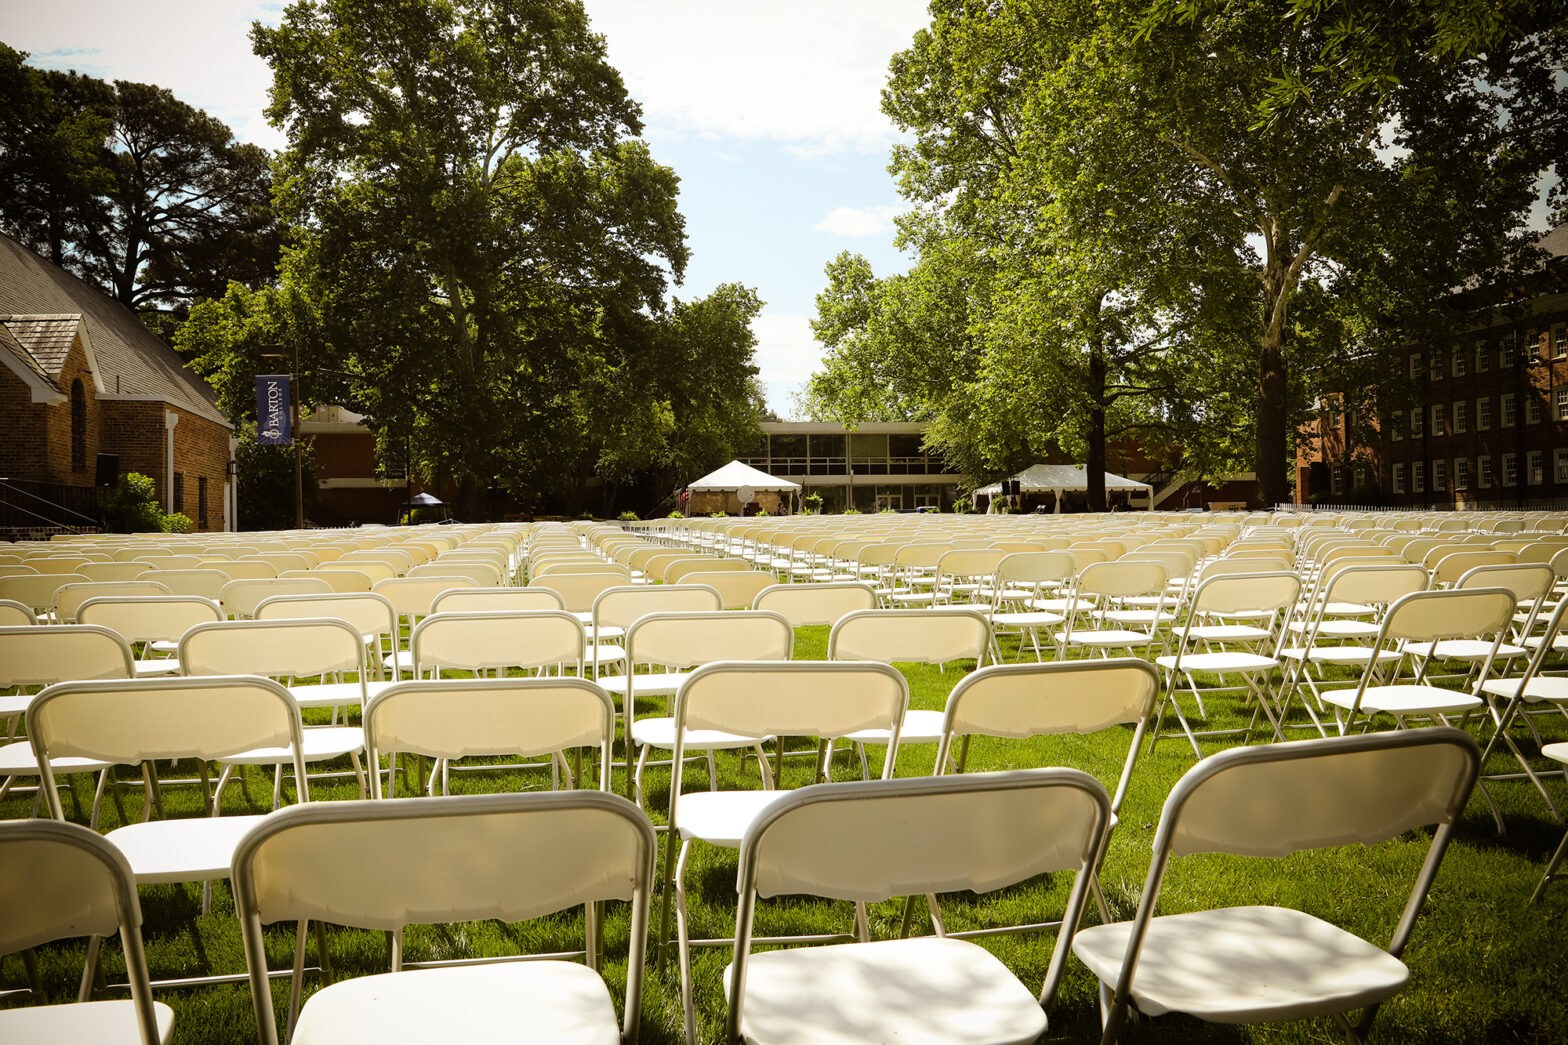 Set-up for Barton College Commencement Exercises